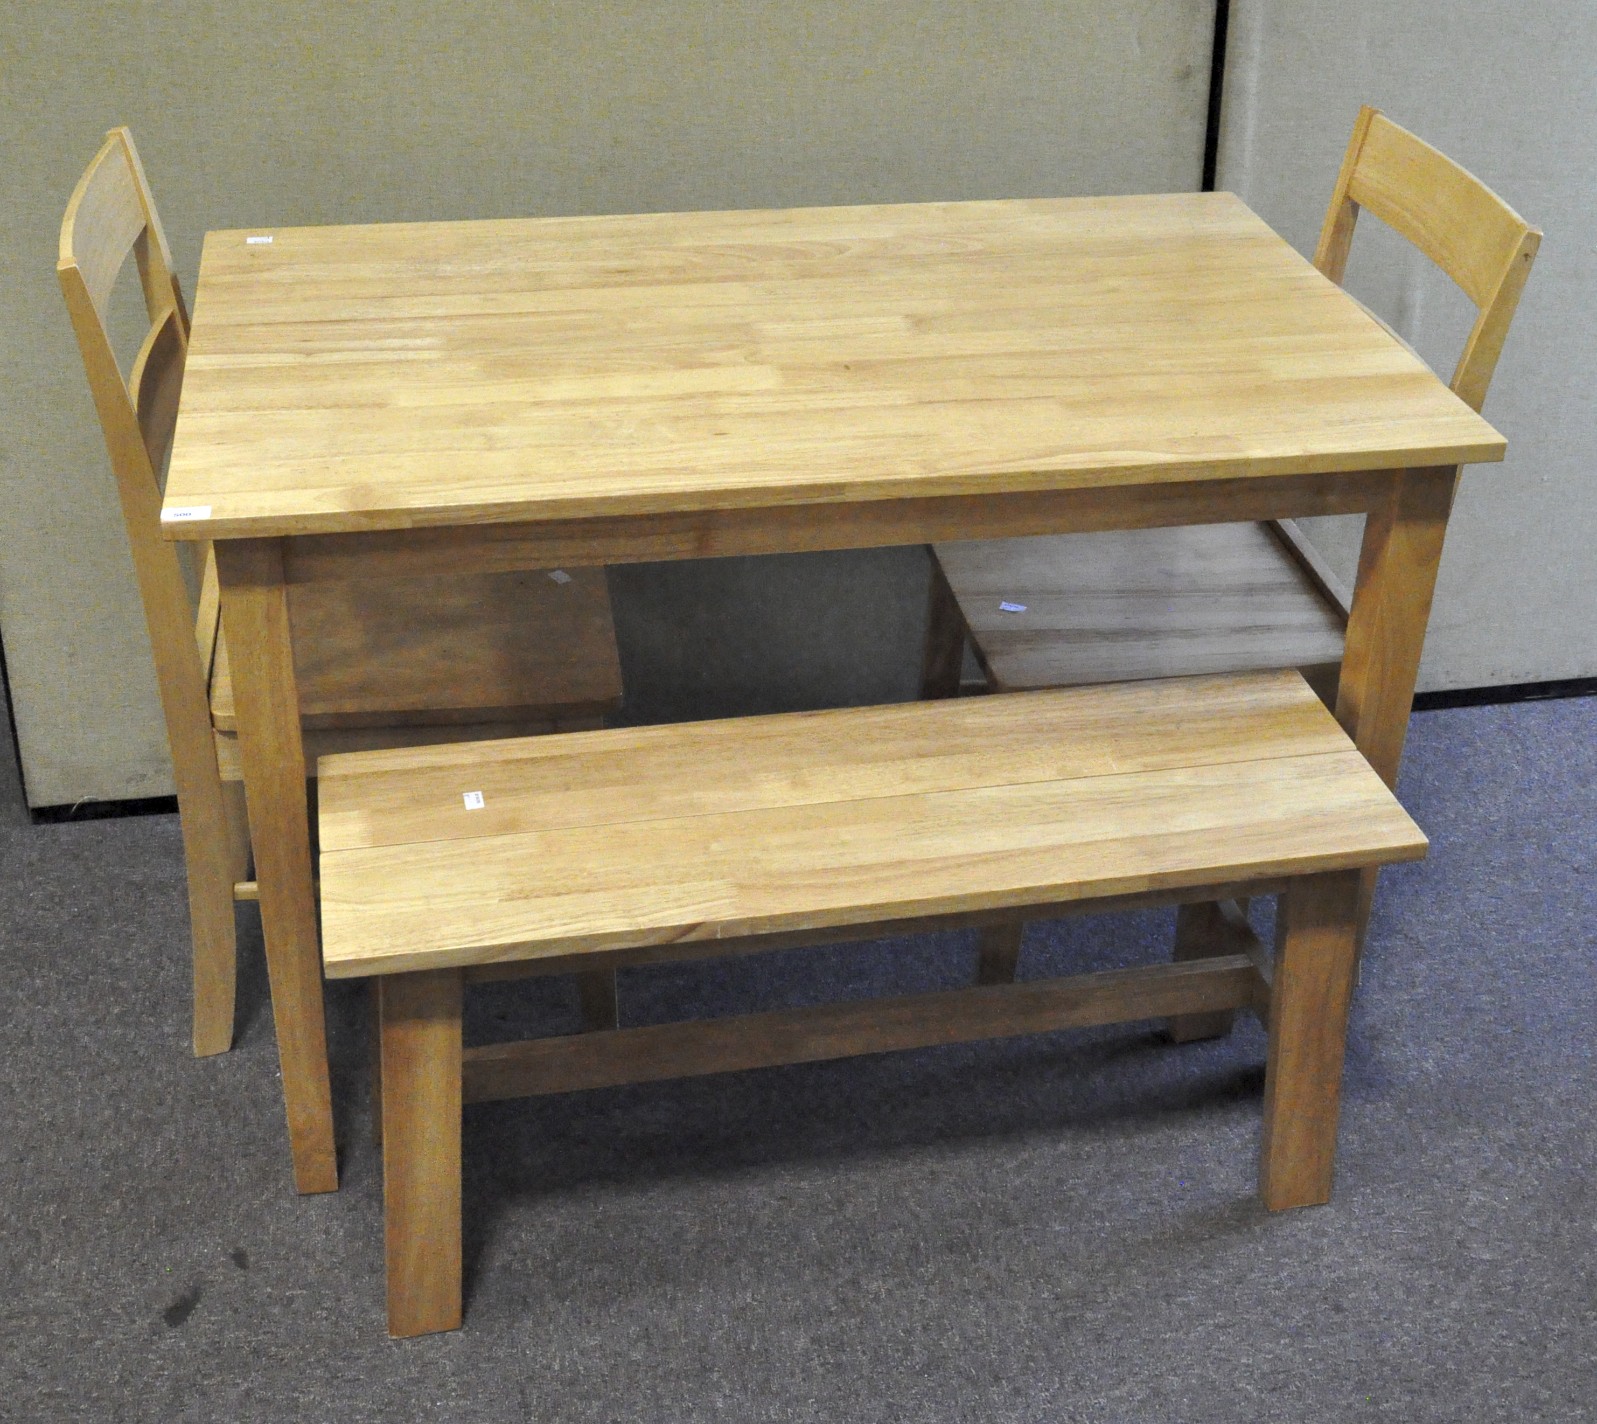 A modern dining table with two chairs and a bench,